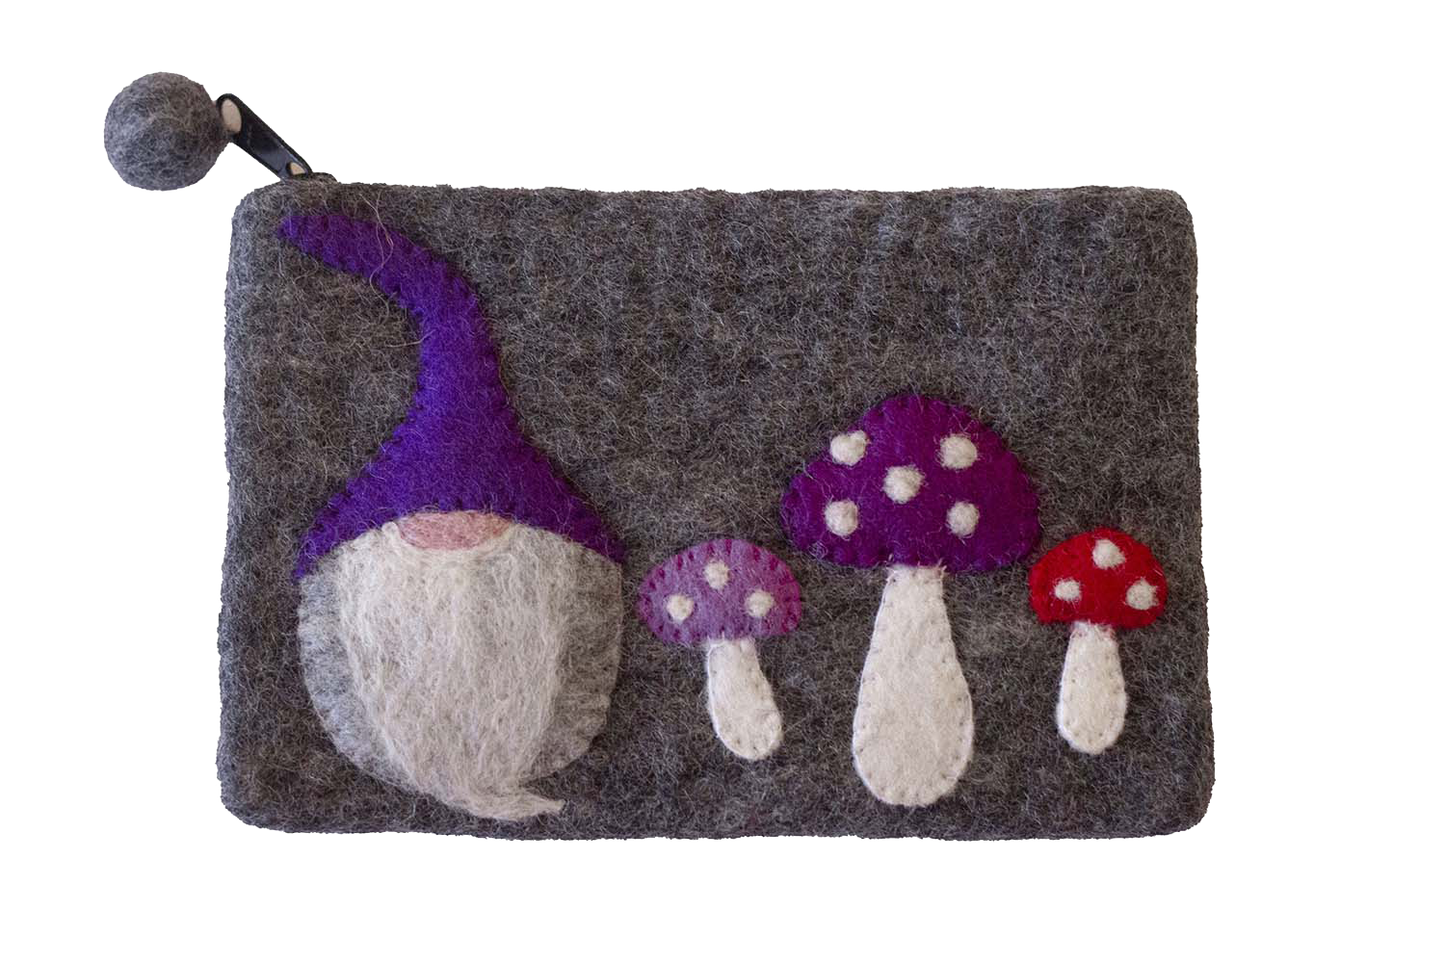 This Global Groove Life, handmade, ethical, fair trade, eco-friendly, sustainable, grey felt zipper coin pouch was created by artisans in Kathmandu Nepal and is adorned with an adorable gnome with mushrooms motif.